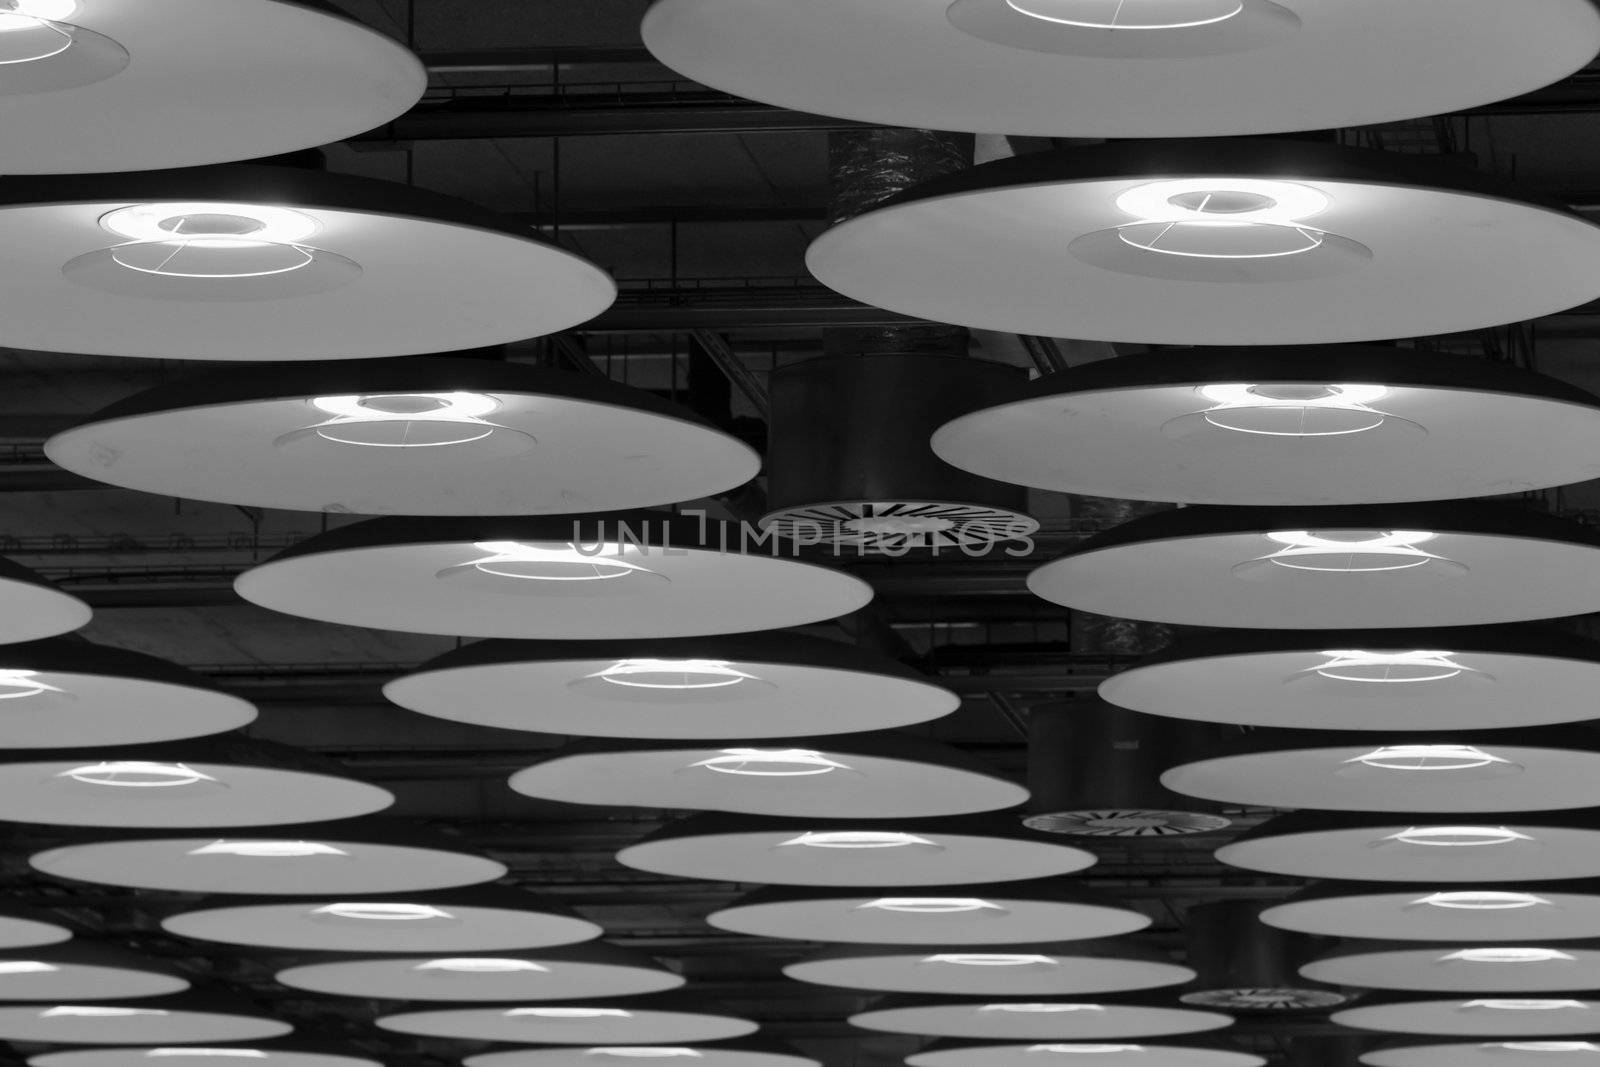 Modern lamps at the Airport Barajas in Madrid